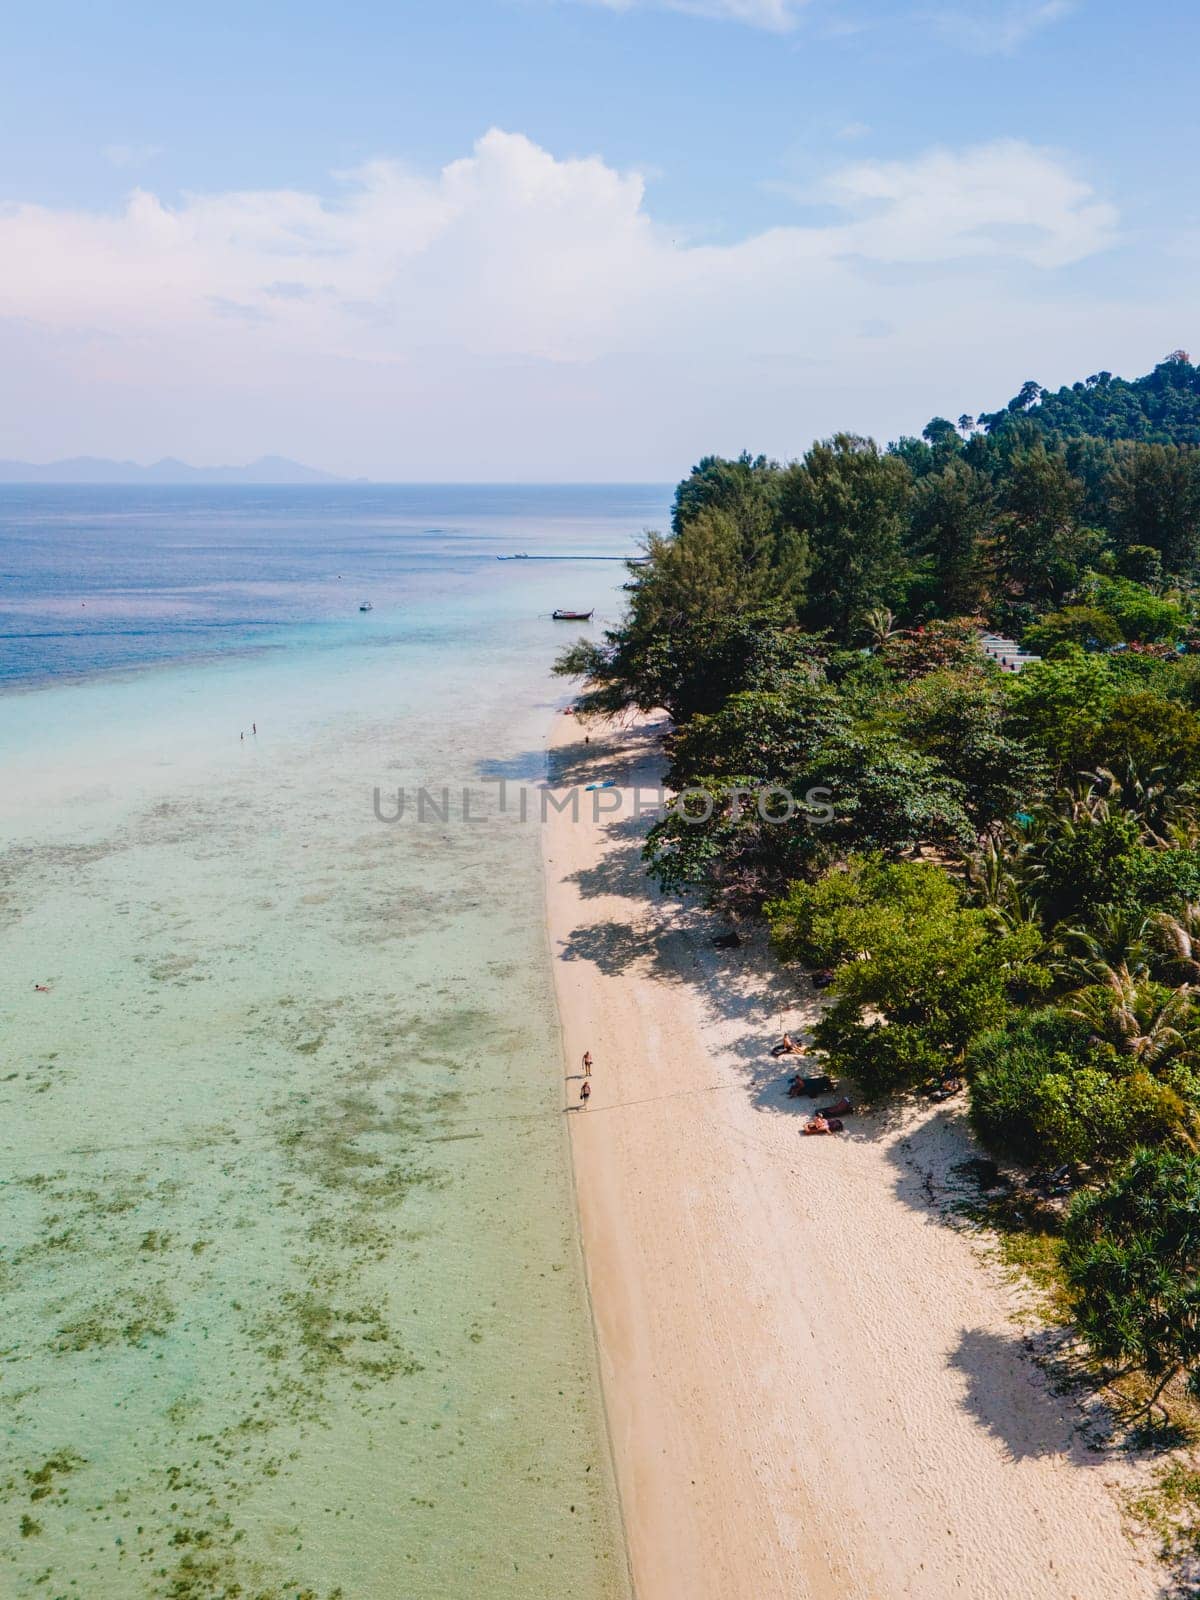 Koh Kradan a tropical island with palm trees soft white sand, and a turqouse colored ocean in Koh Kradan Trang Thailand